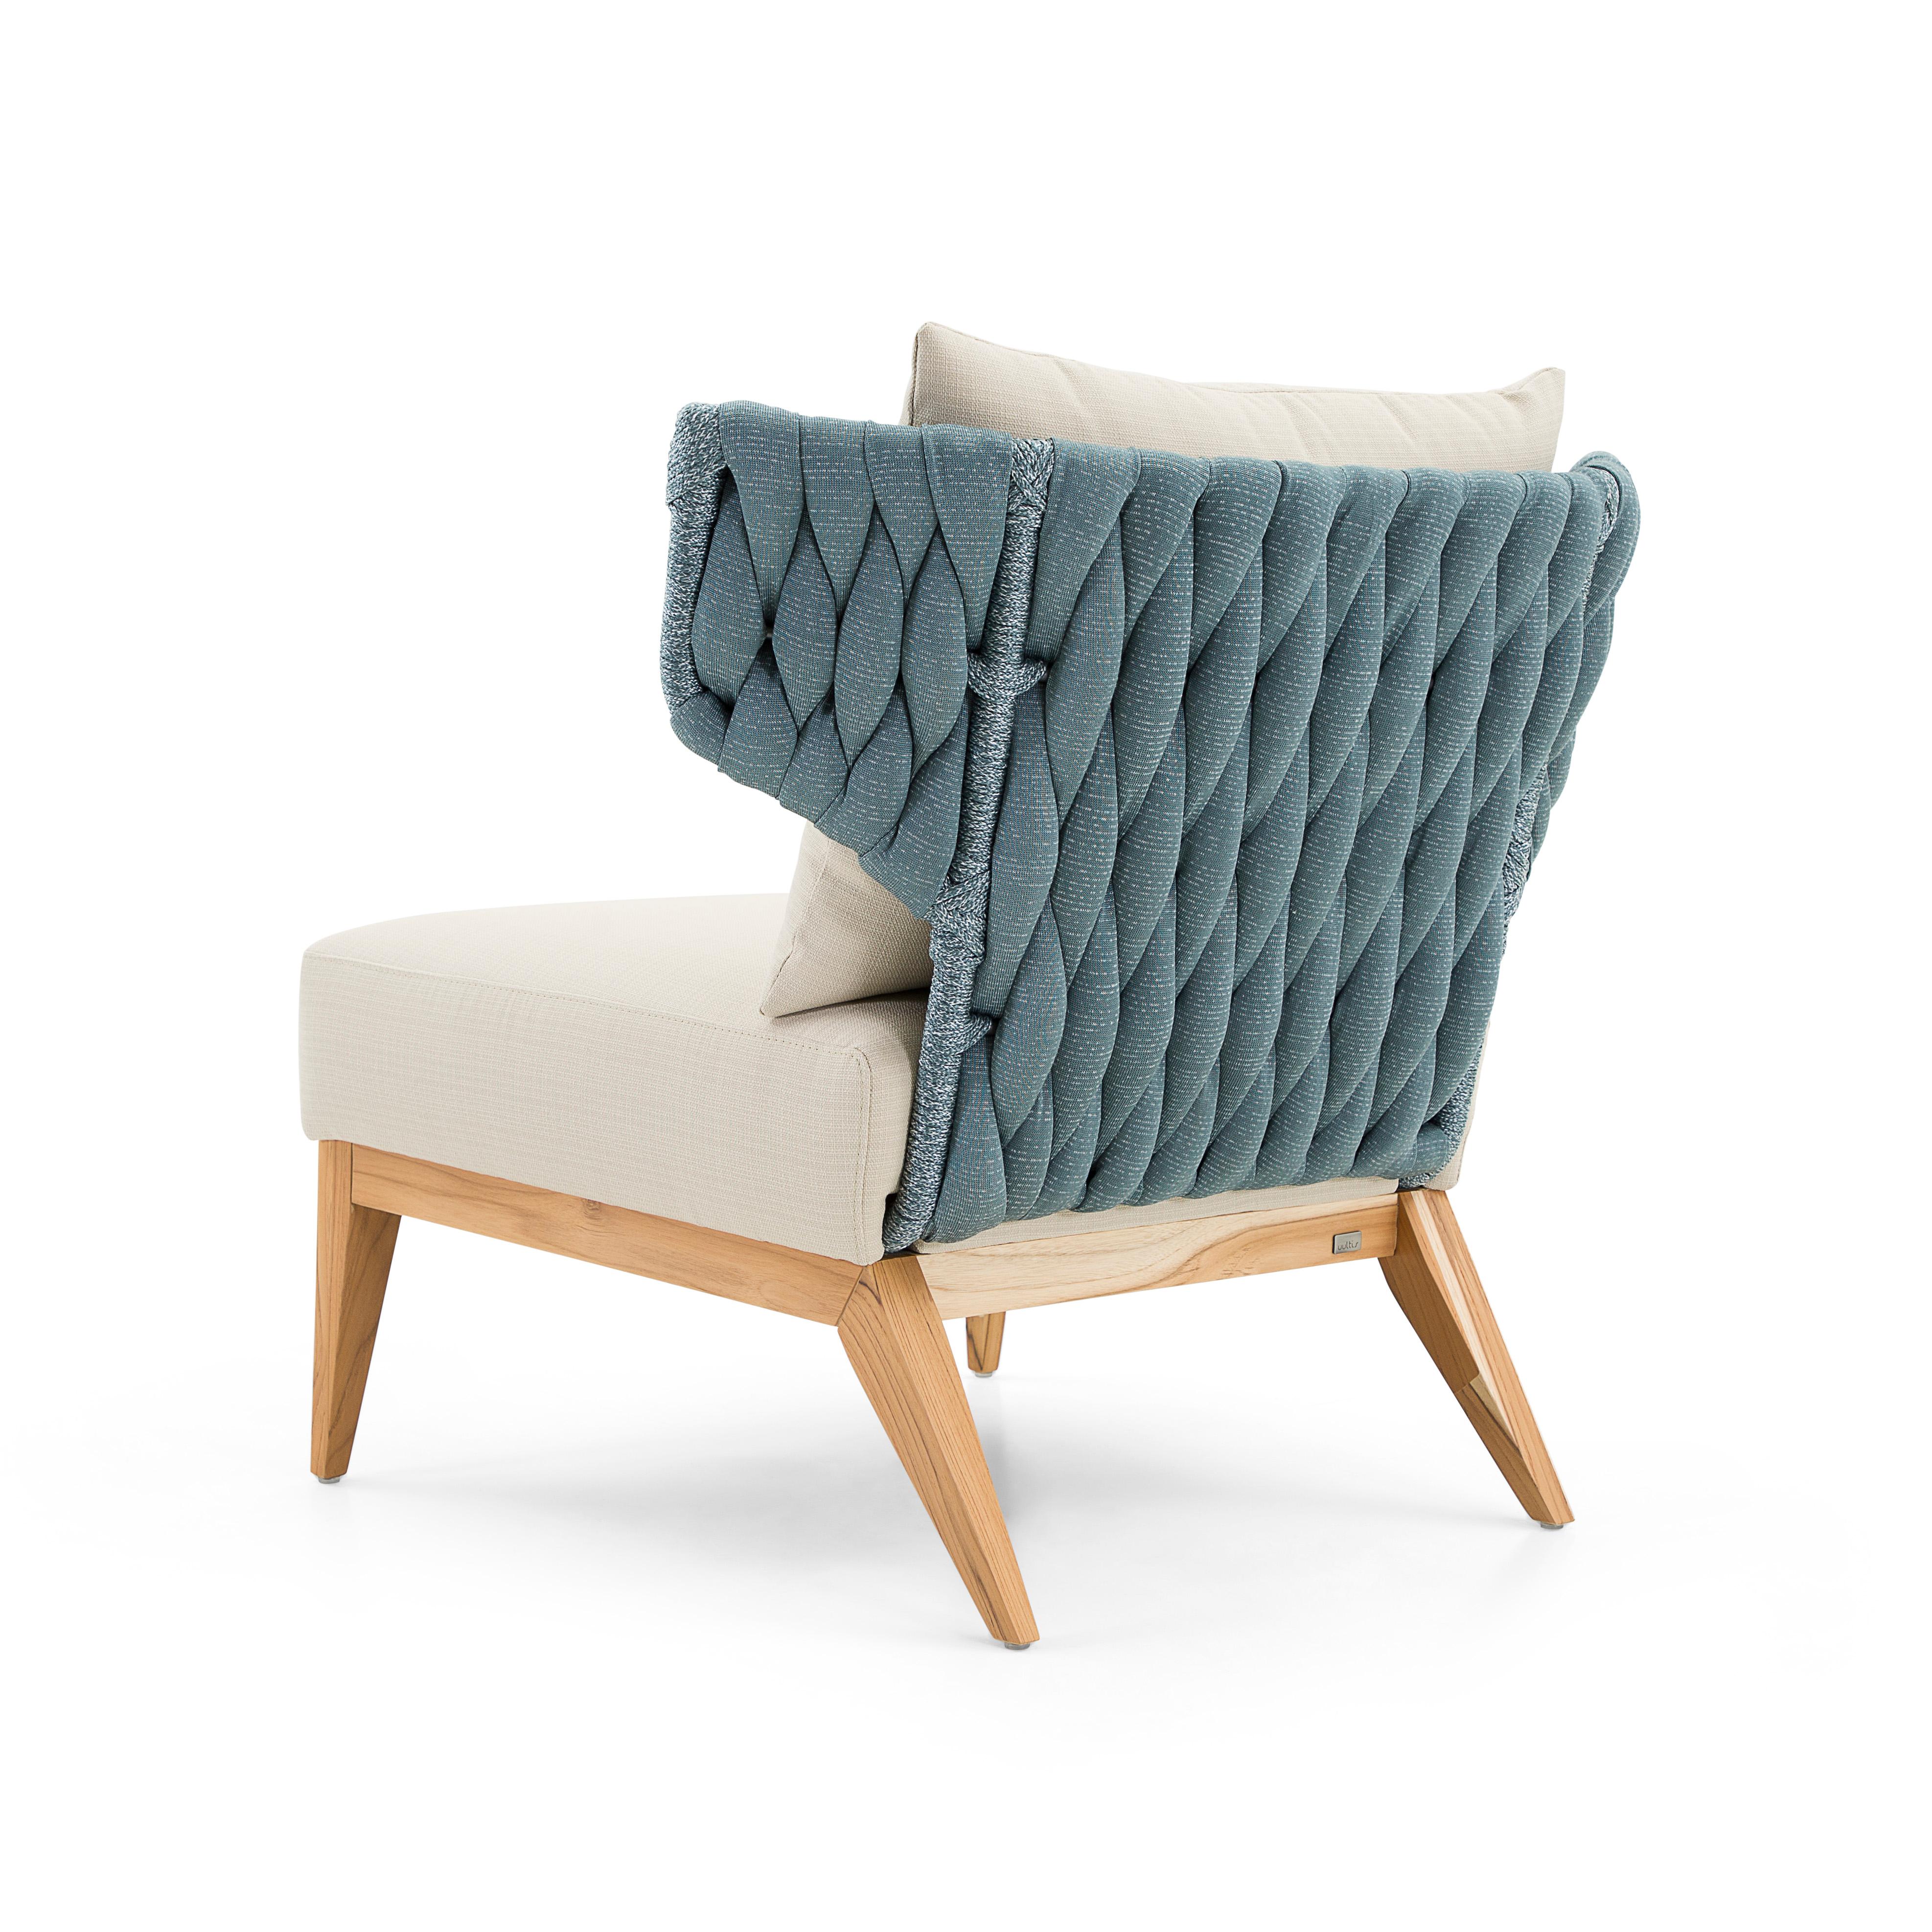 Upholstery Beluga Outdoor Armchair in Beige and Blue fabric and Teak wood For Sale